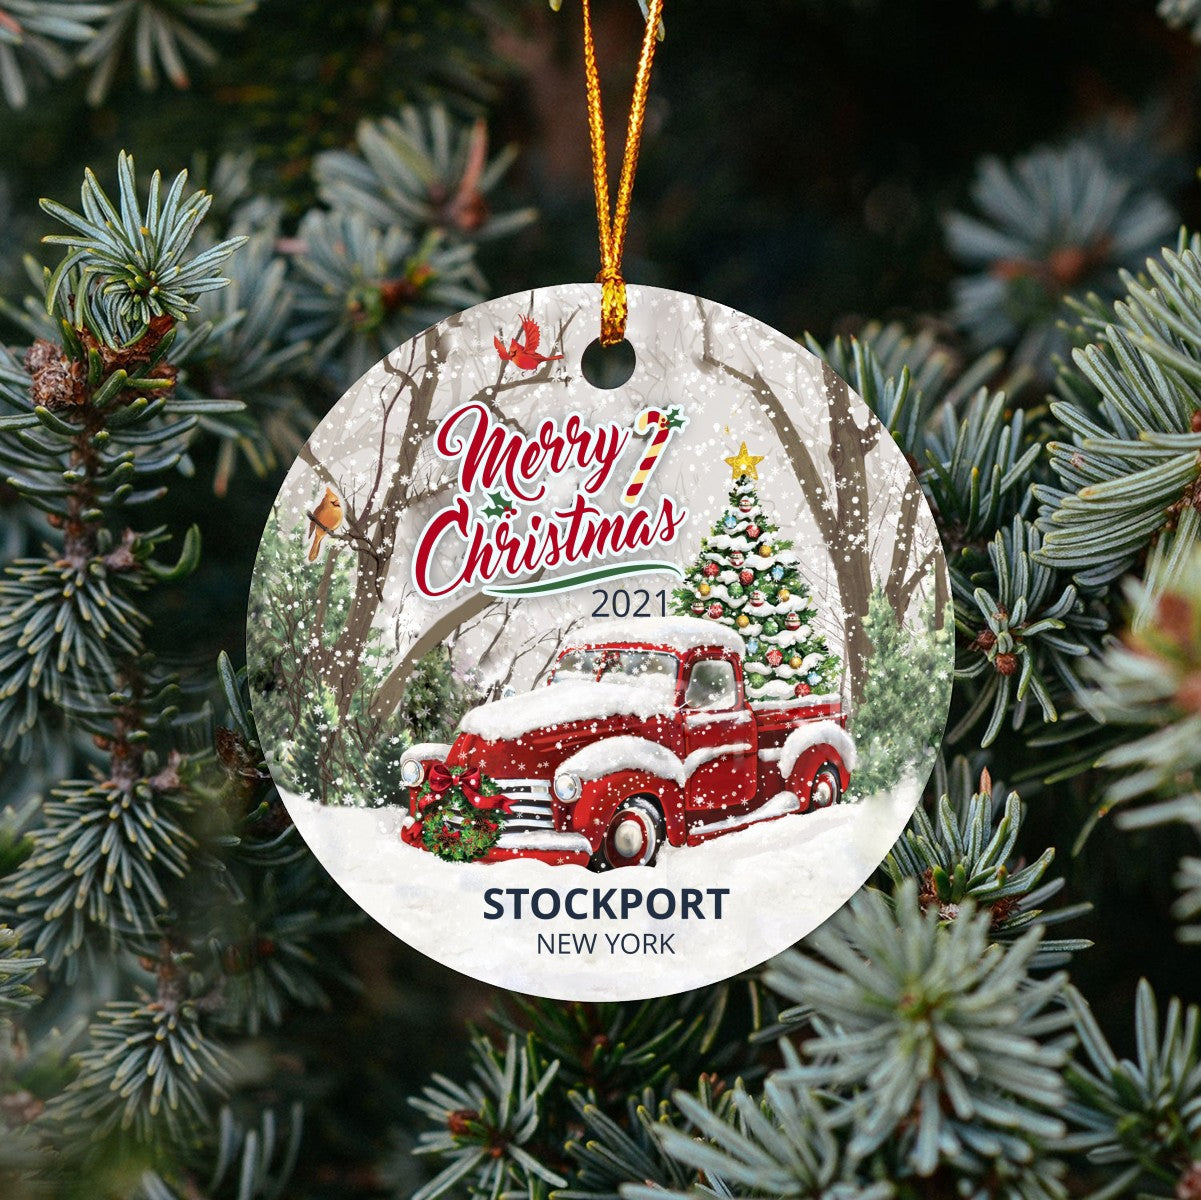 Christmas Tree Ornaments Stockport - Ornament With Name City, State Stockport New York NY Ornament - Red Truck Xmas Ornaments 3'' Plastic Gift For Family, Friend And Housewarming